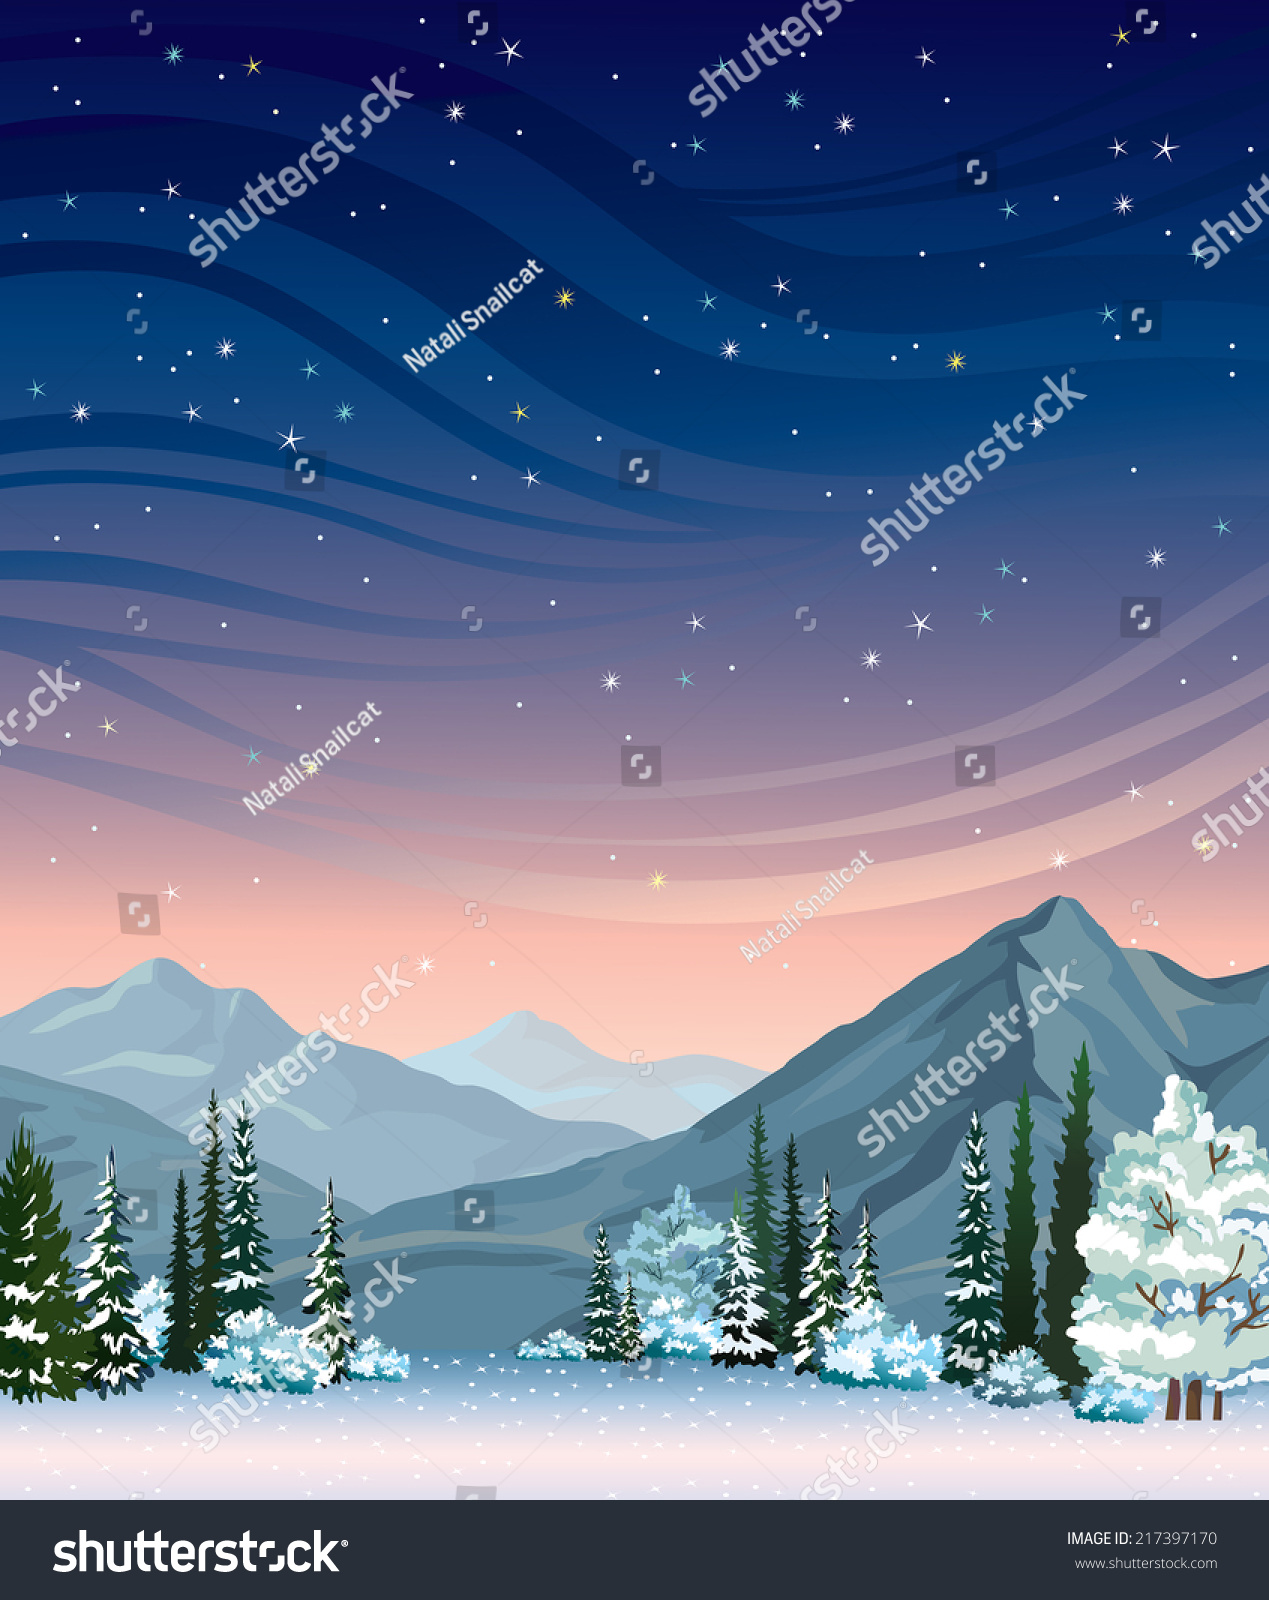 Night Starry Sky Frozen Forest Mountains Stock Photo (Photo, Vector ...